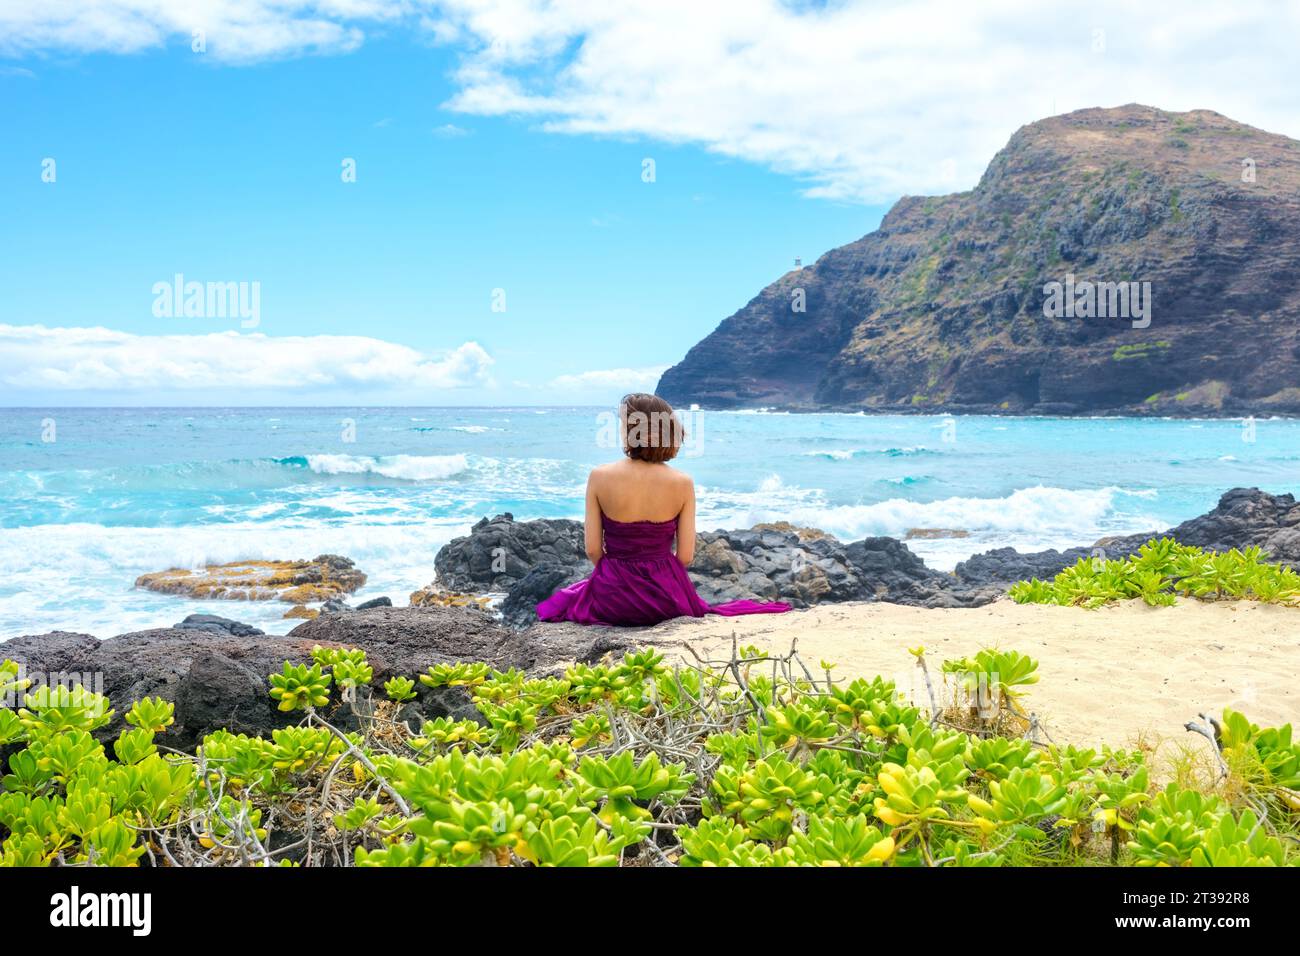 One young woman in purple dress sitting on rocky shore looking out over ocean at Makapu'u beach in Oahu, Hawaii Stock Photo